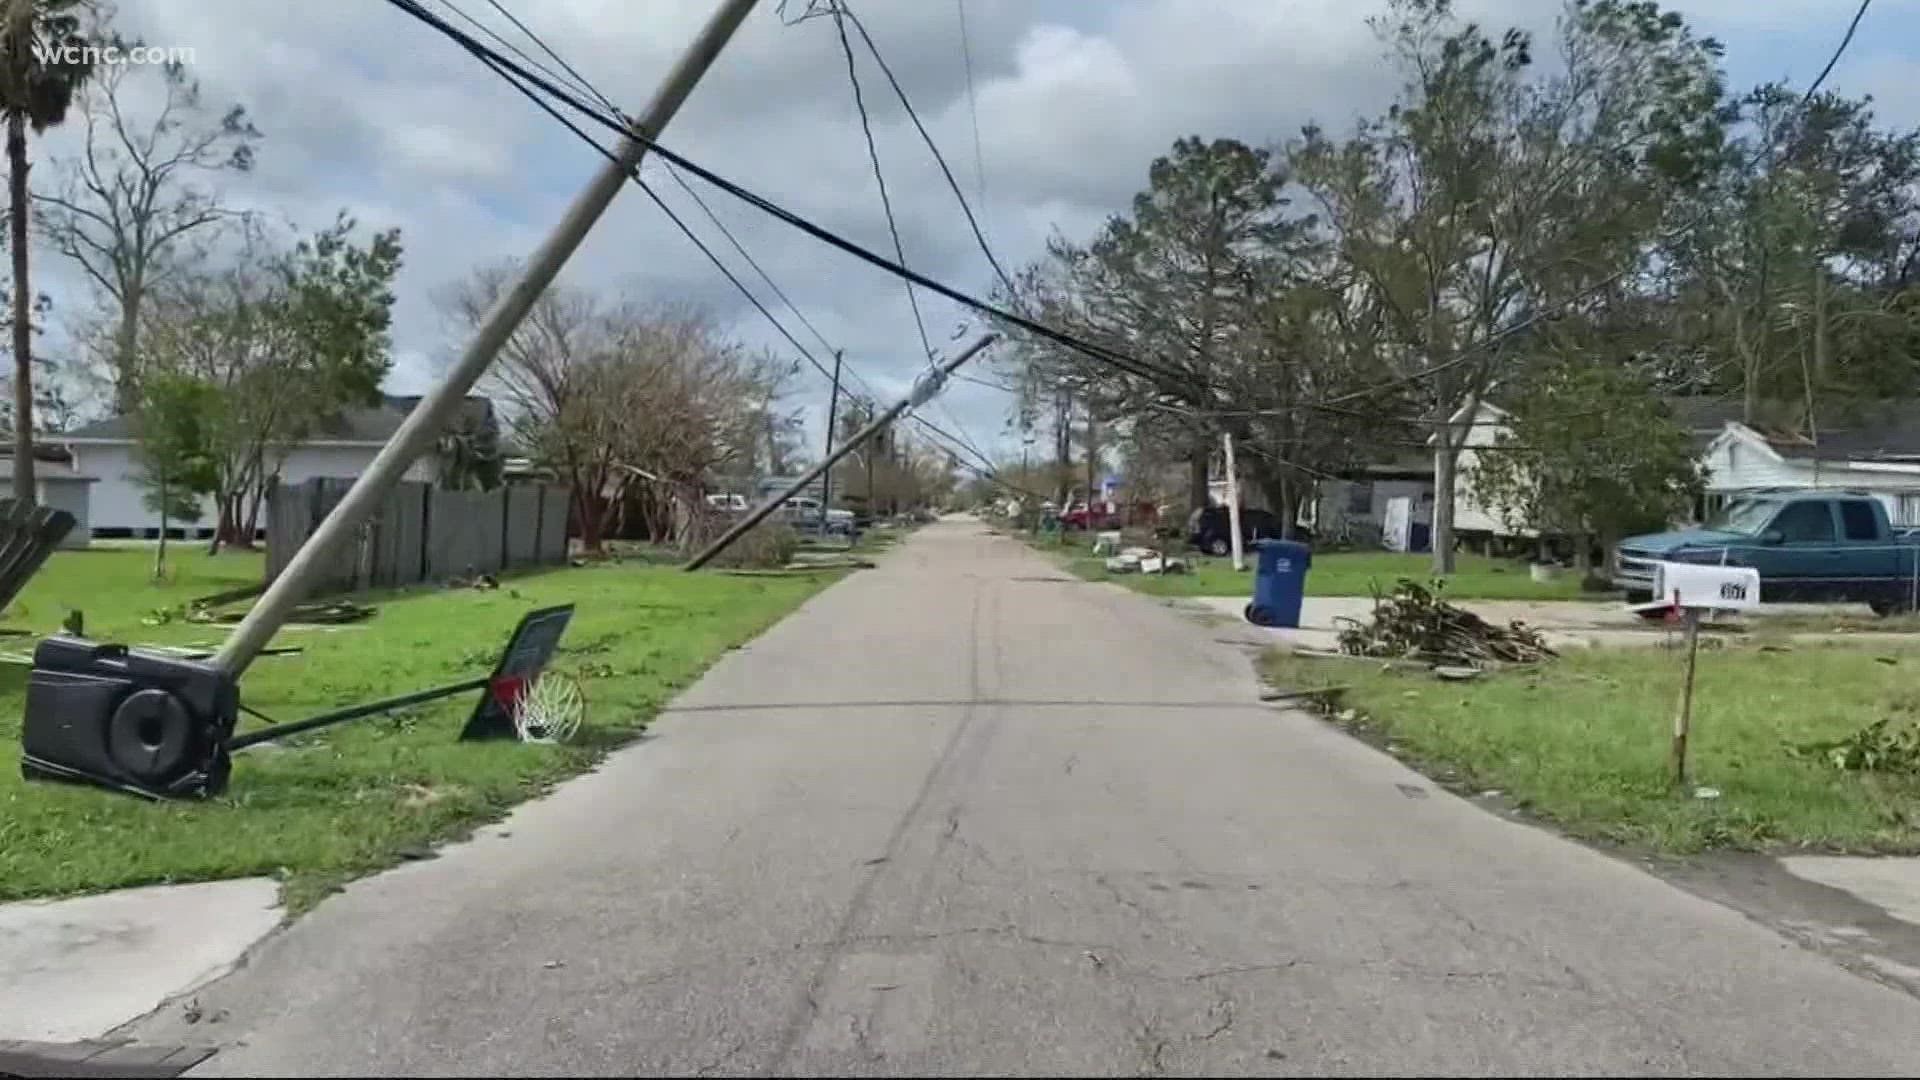 During Ida, power company Entergy says 2,000 miles of power lines were knocked down.